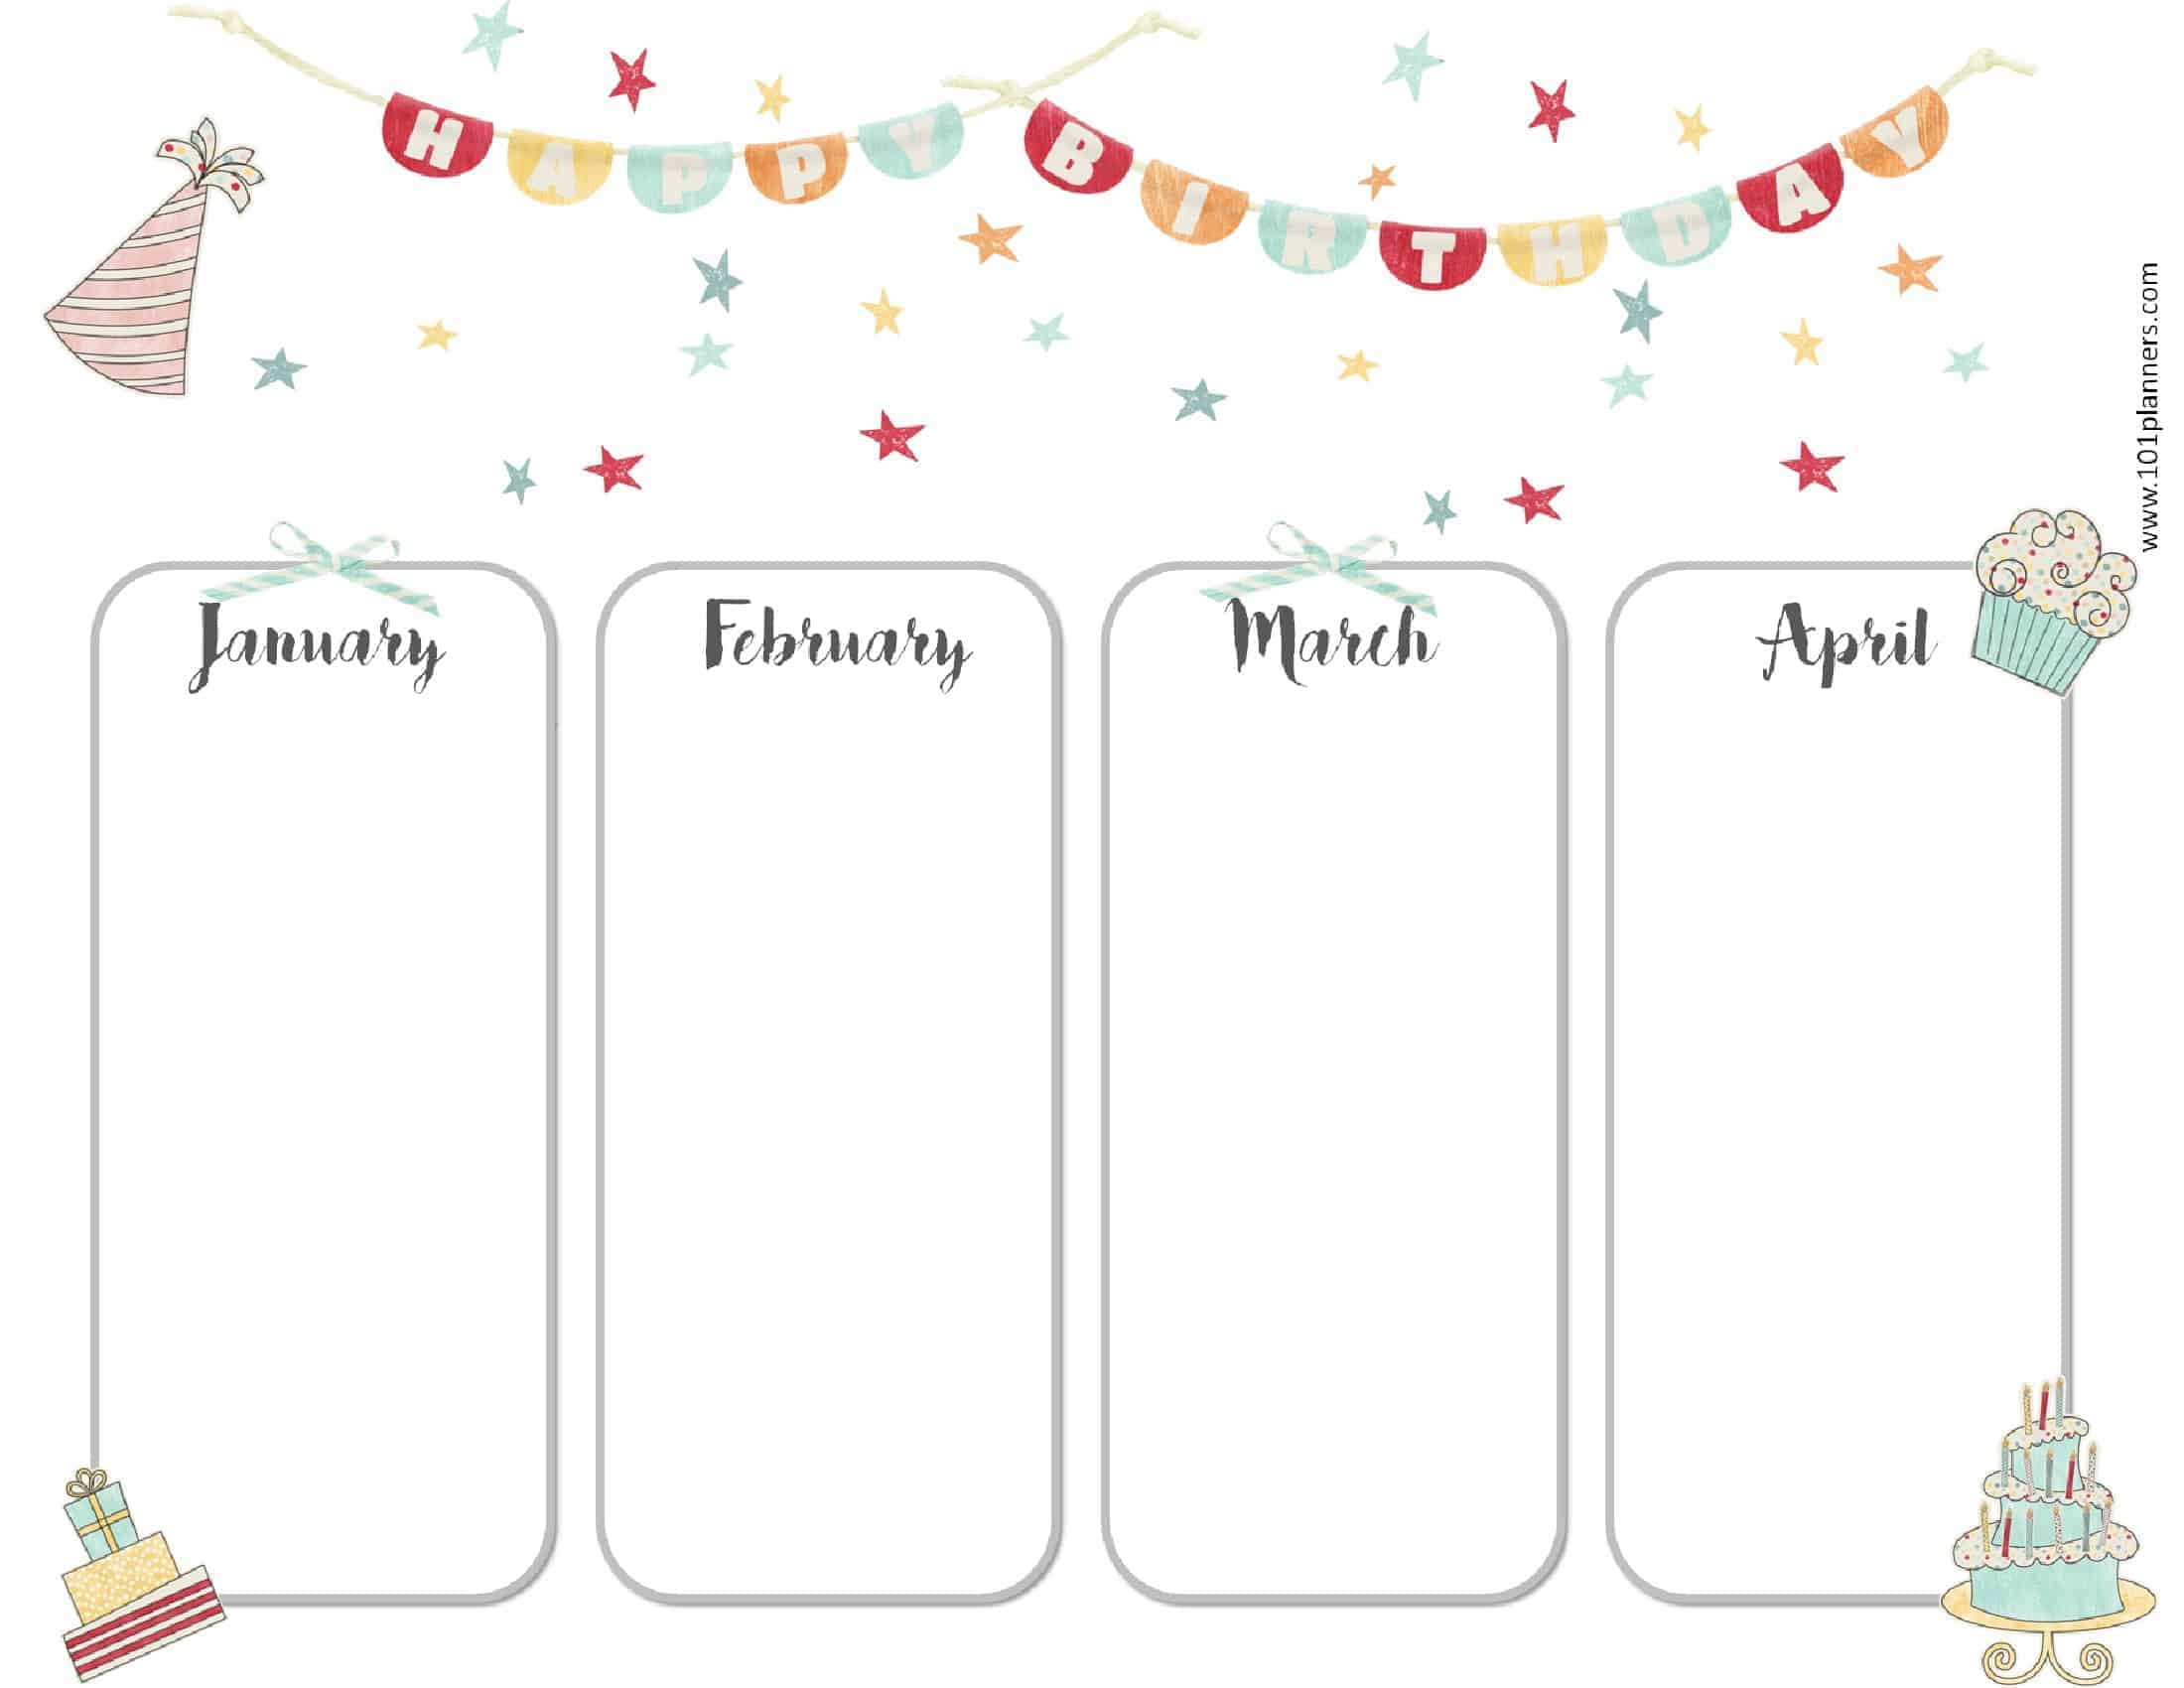 never-forget-a-birthday-with-this-free-birthday-calendar-printable